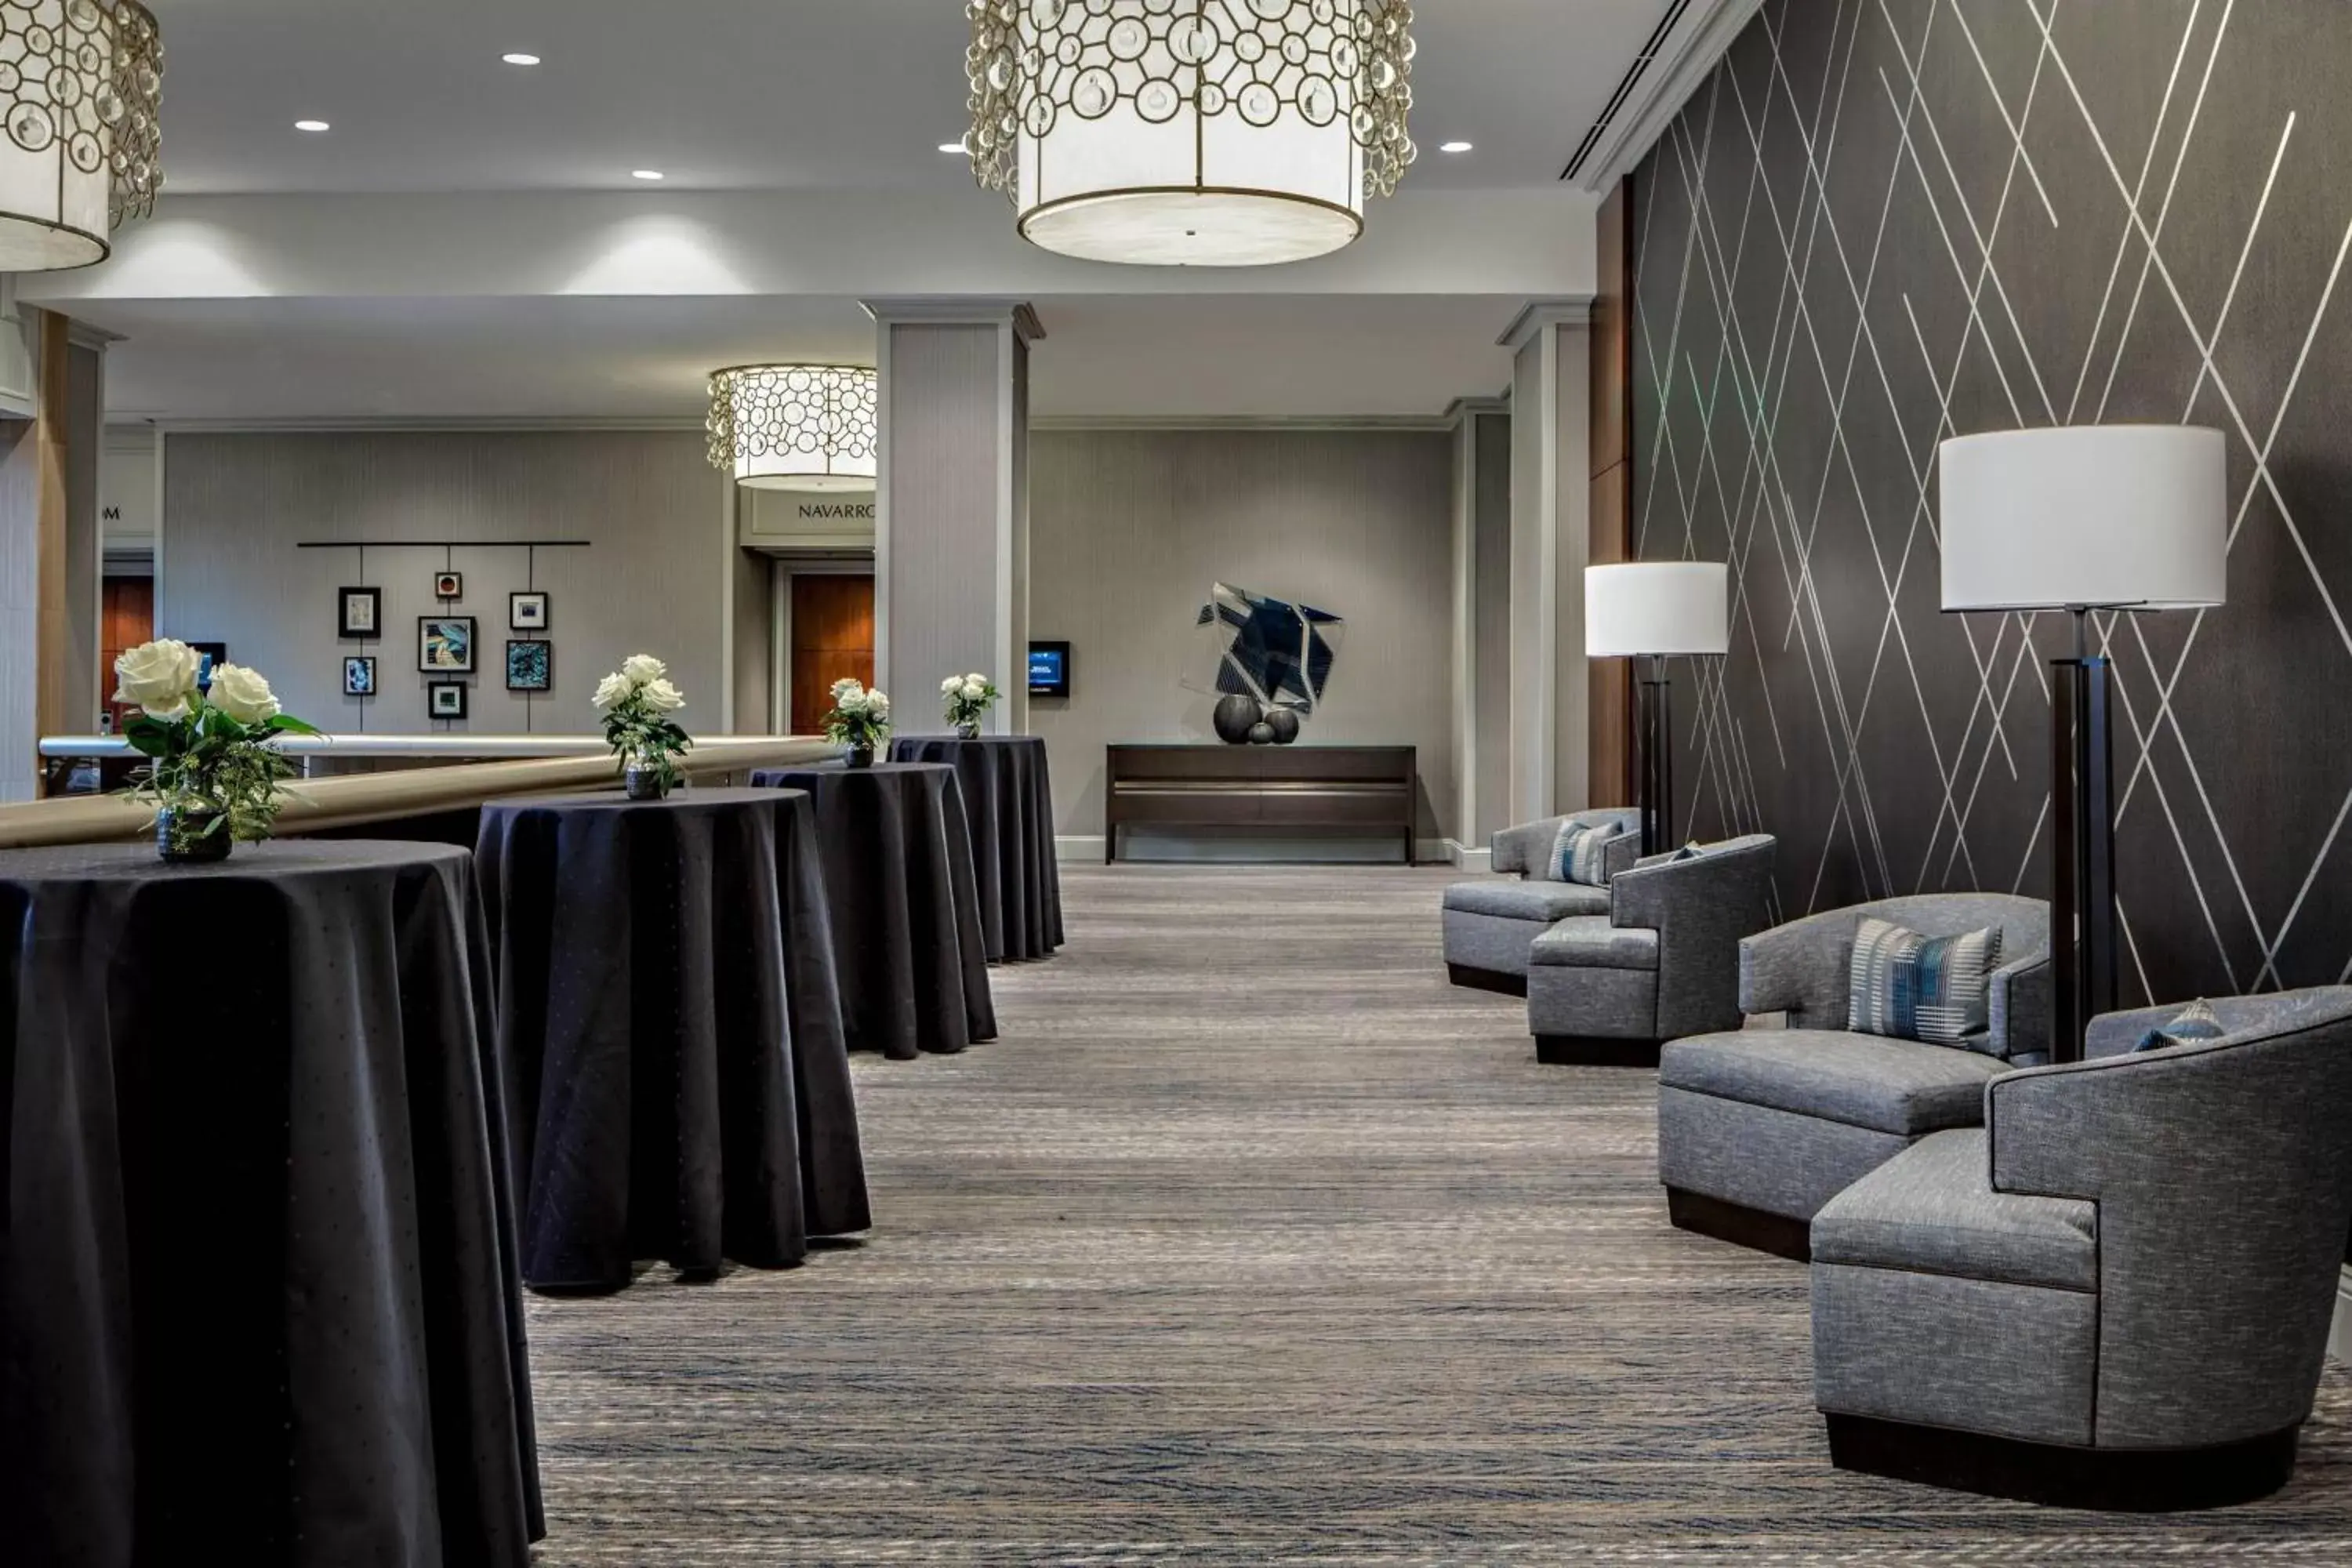 Meeting/conference room, Banquet Facilities in JW Marriott Houston by the Galleria